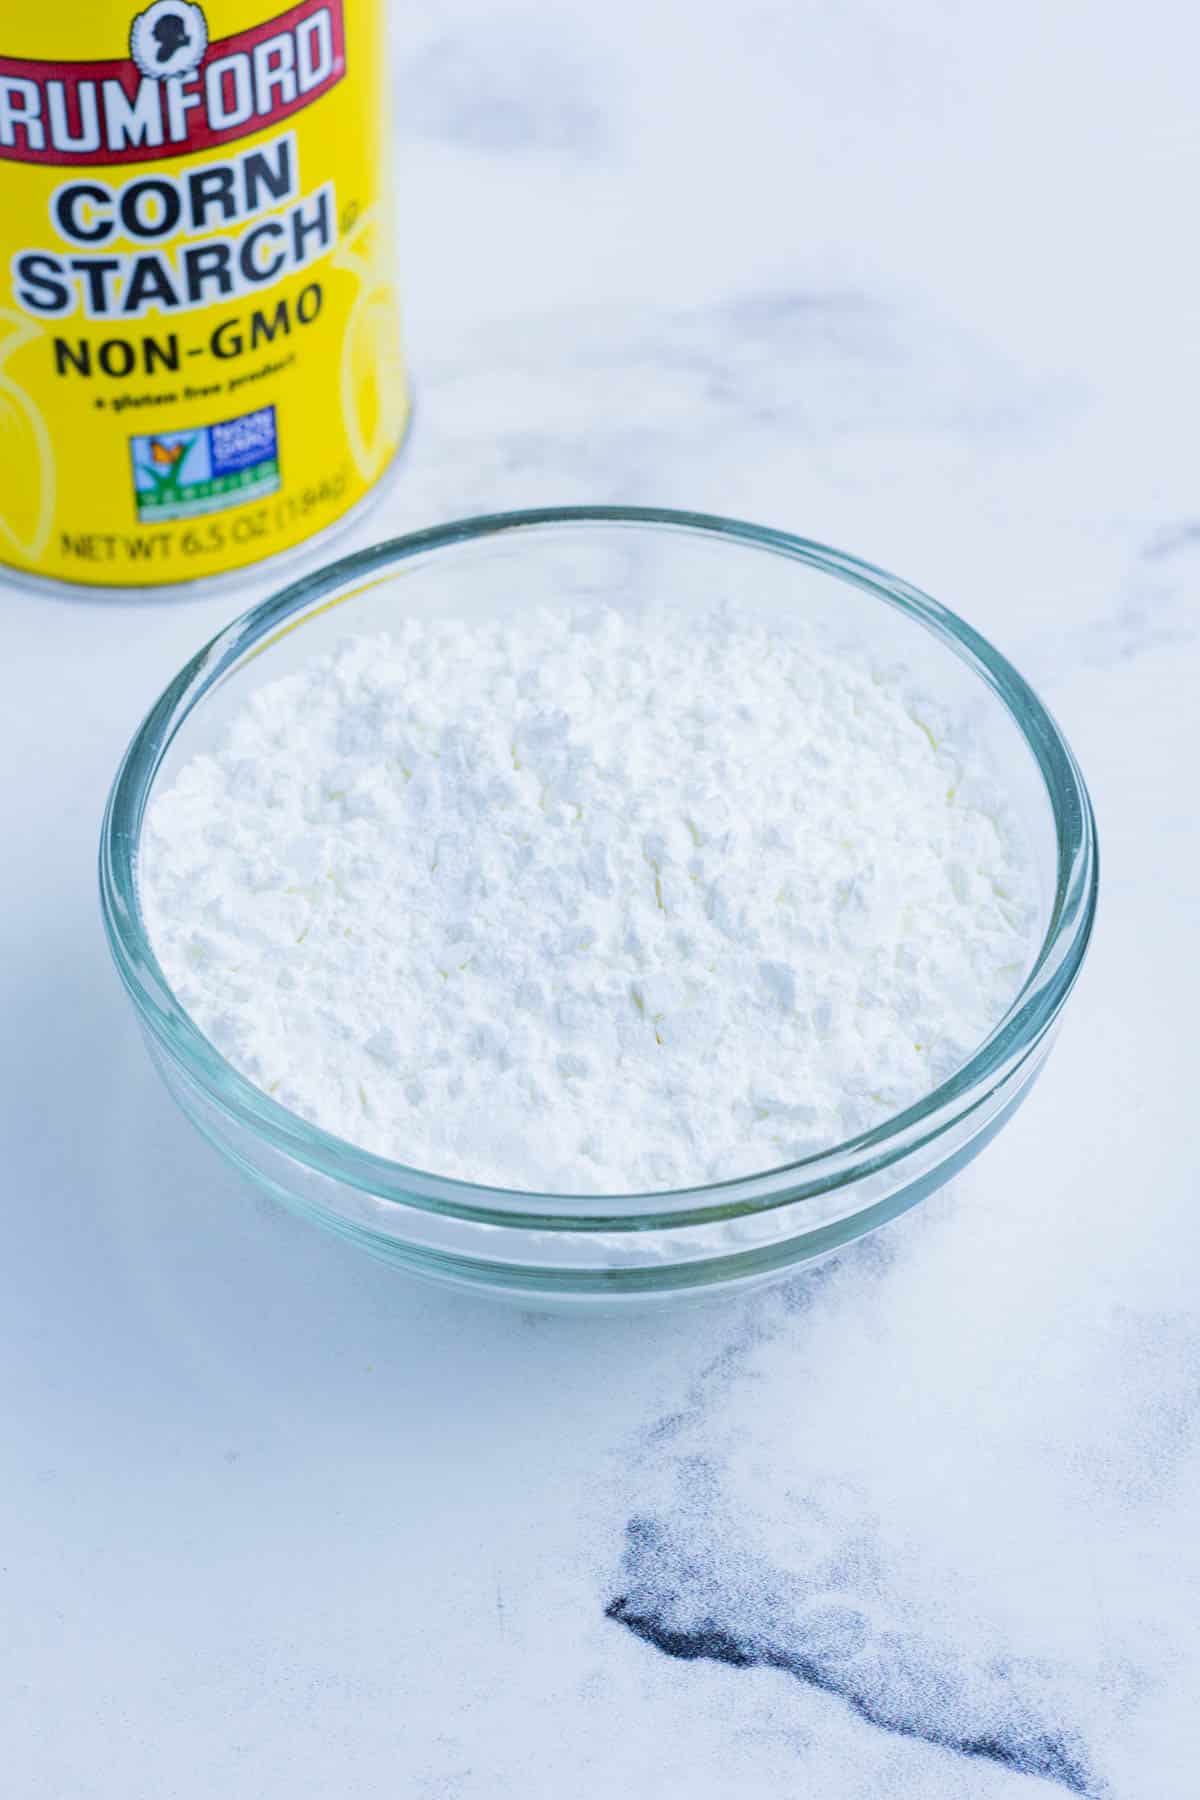 Cornstarch in a small, glass bowl on the countertop with the original cornstarch container in the background.